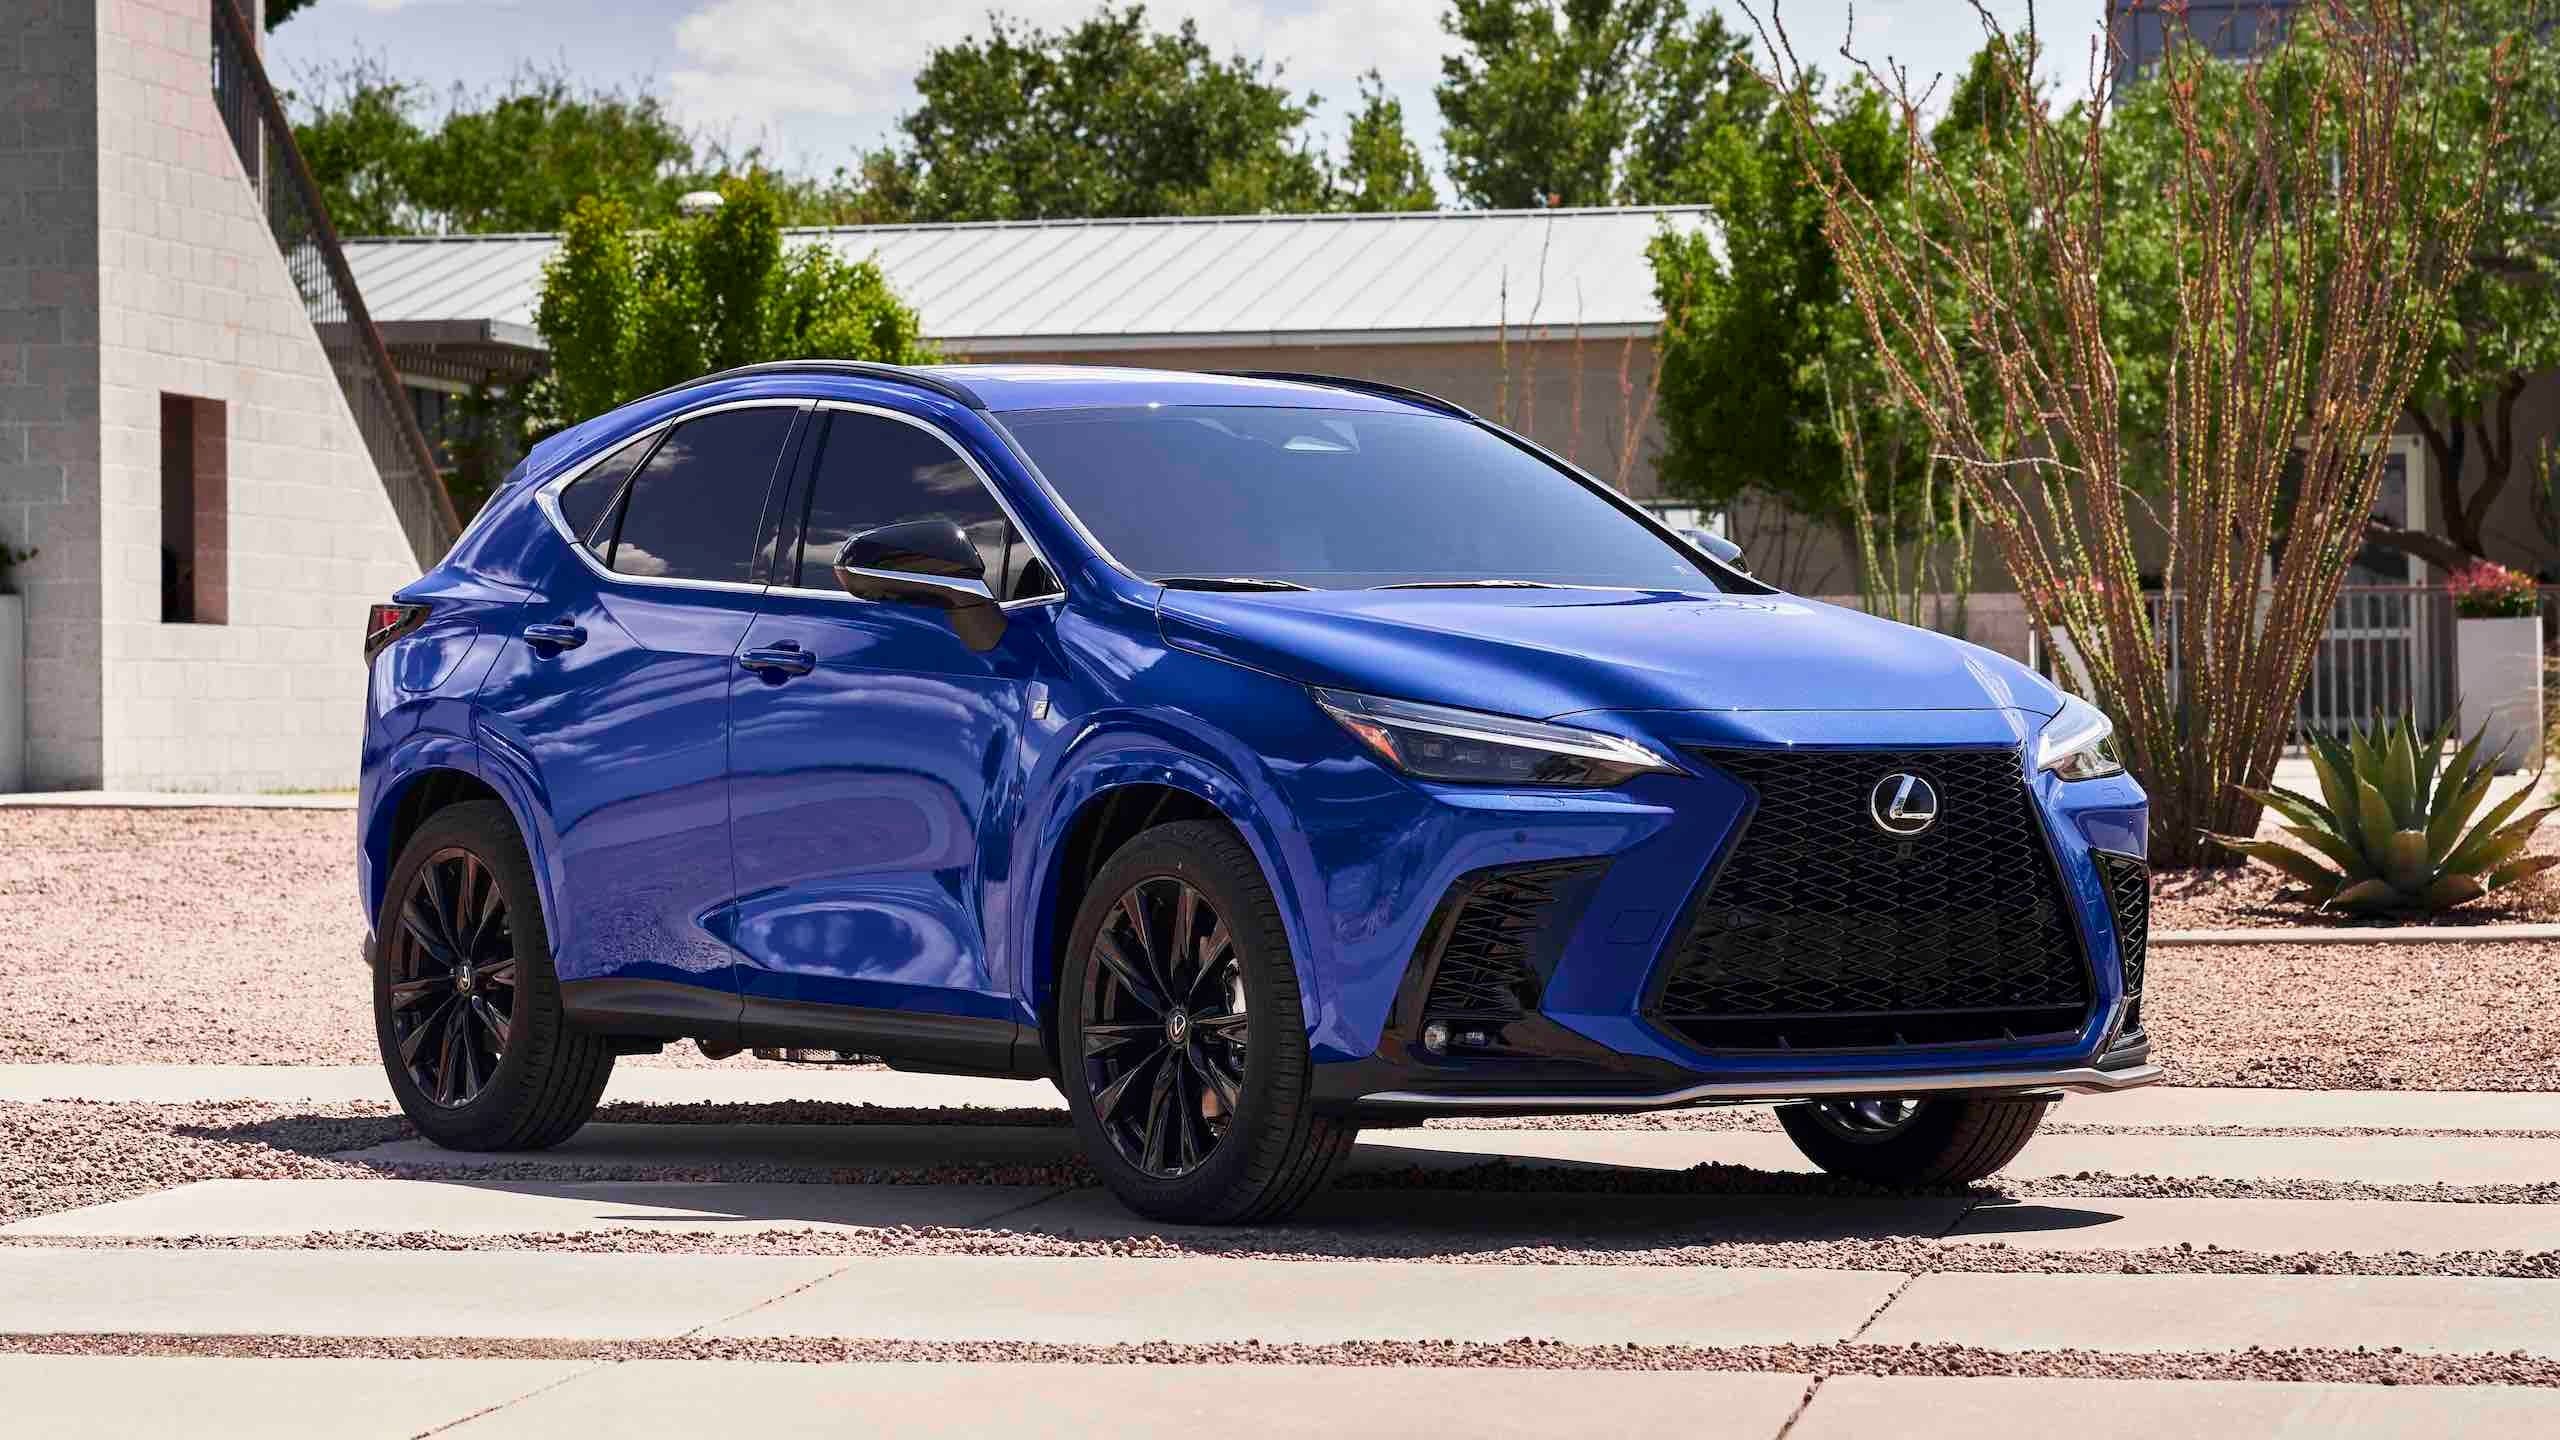 2022 Lexus NX: Small Crossover With Big Plans as Lexus’ First-Ever Plug-In Hybrid